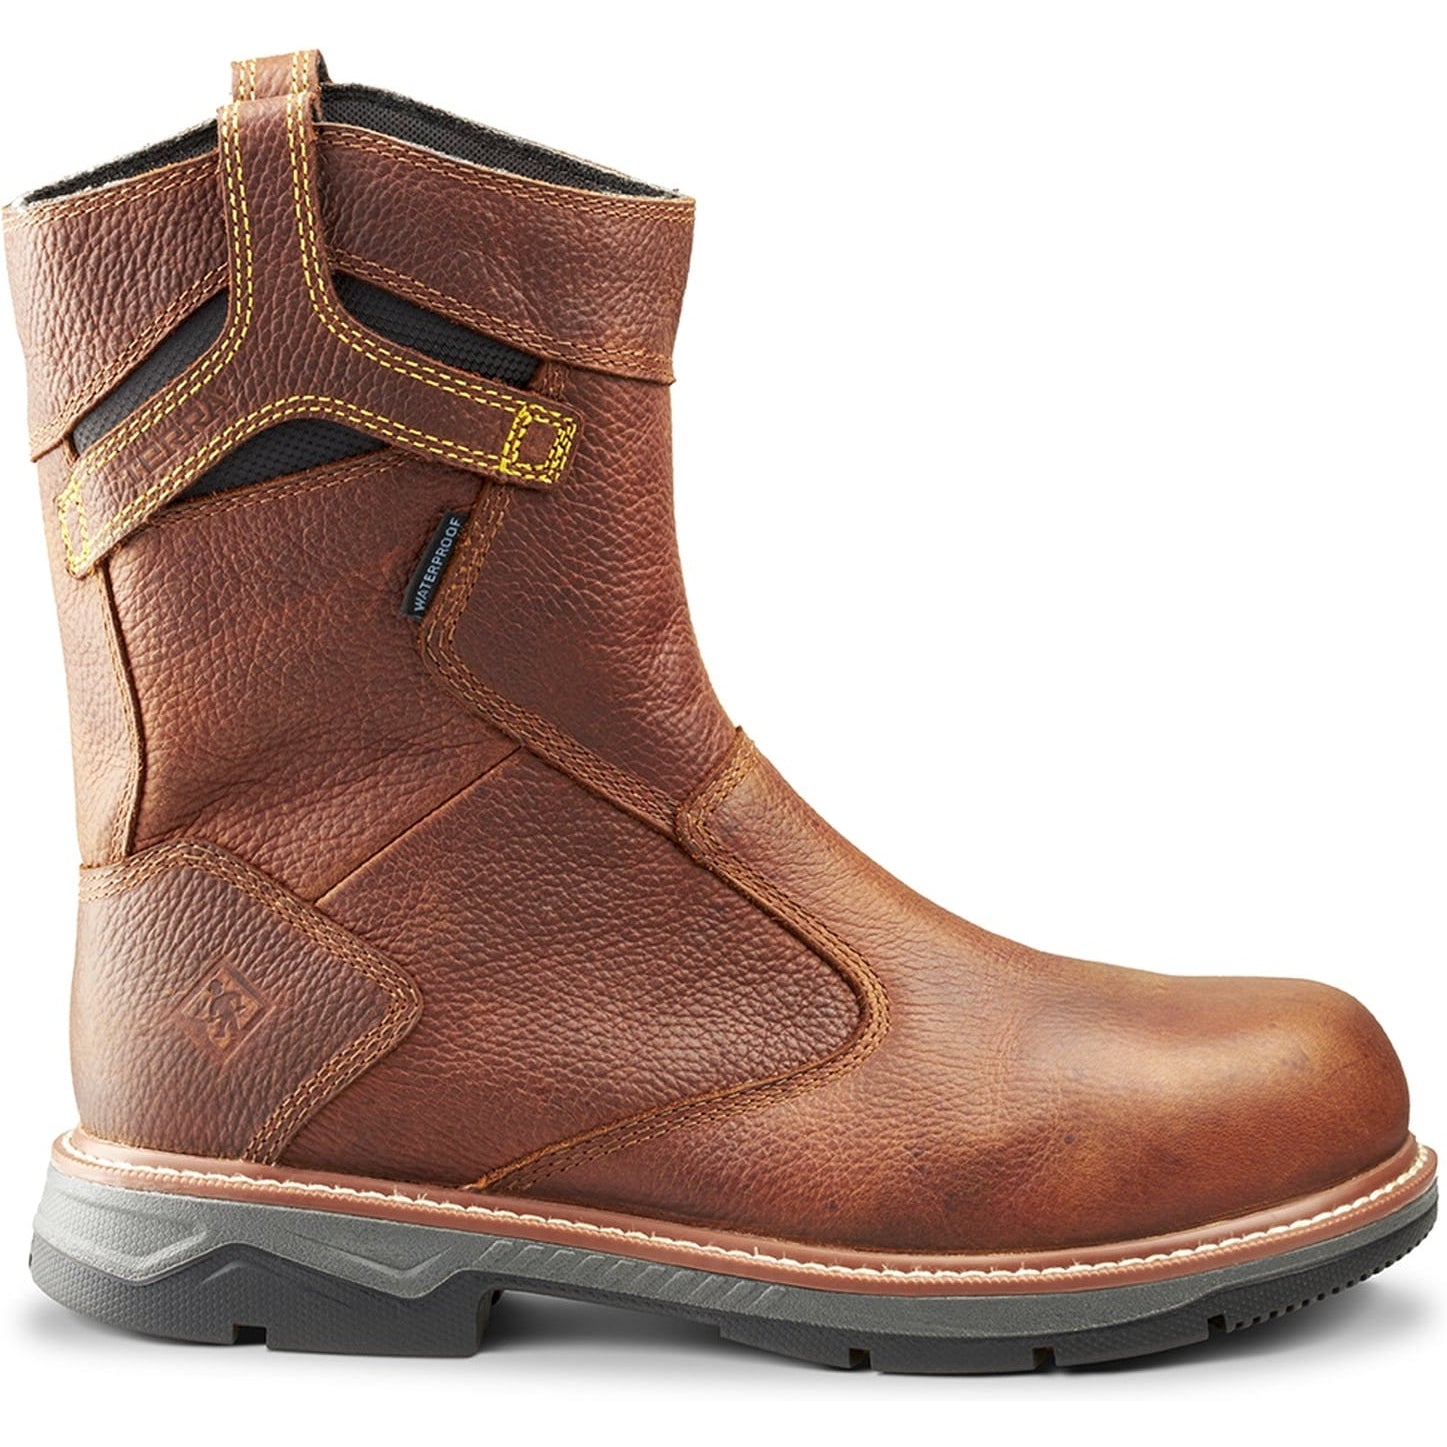 Terra Men's Patton AT Waterproof Pull-On Safety Work Boot -Brown- 4TCBBN  - Overlook Boots